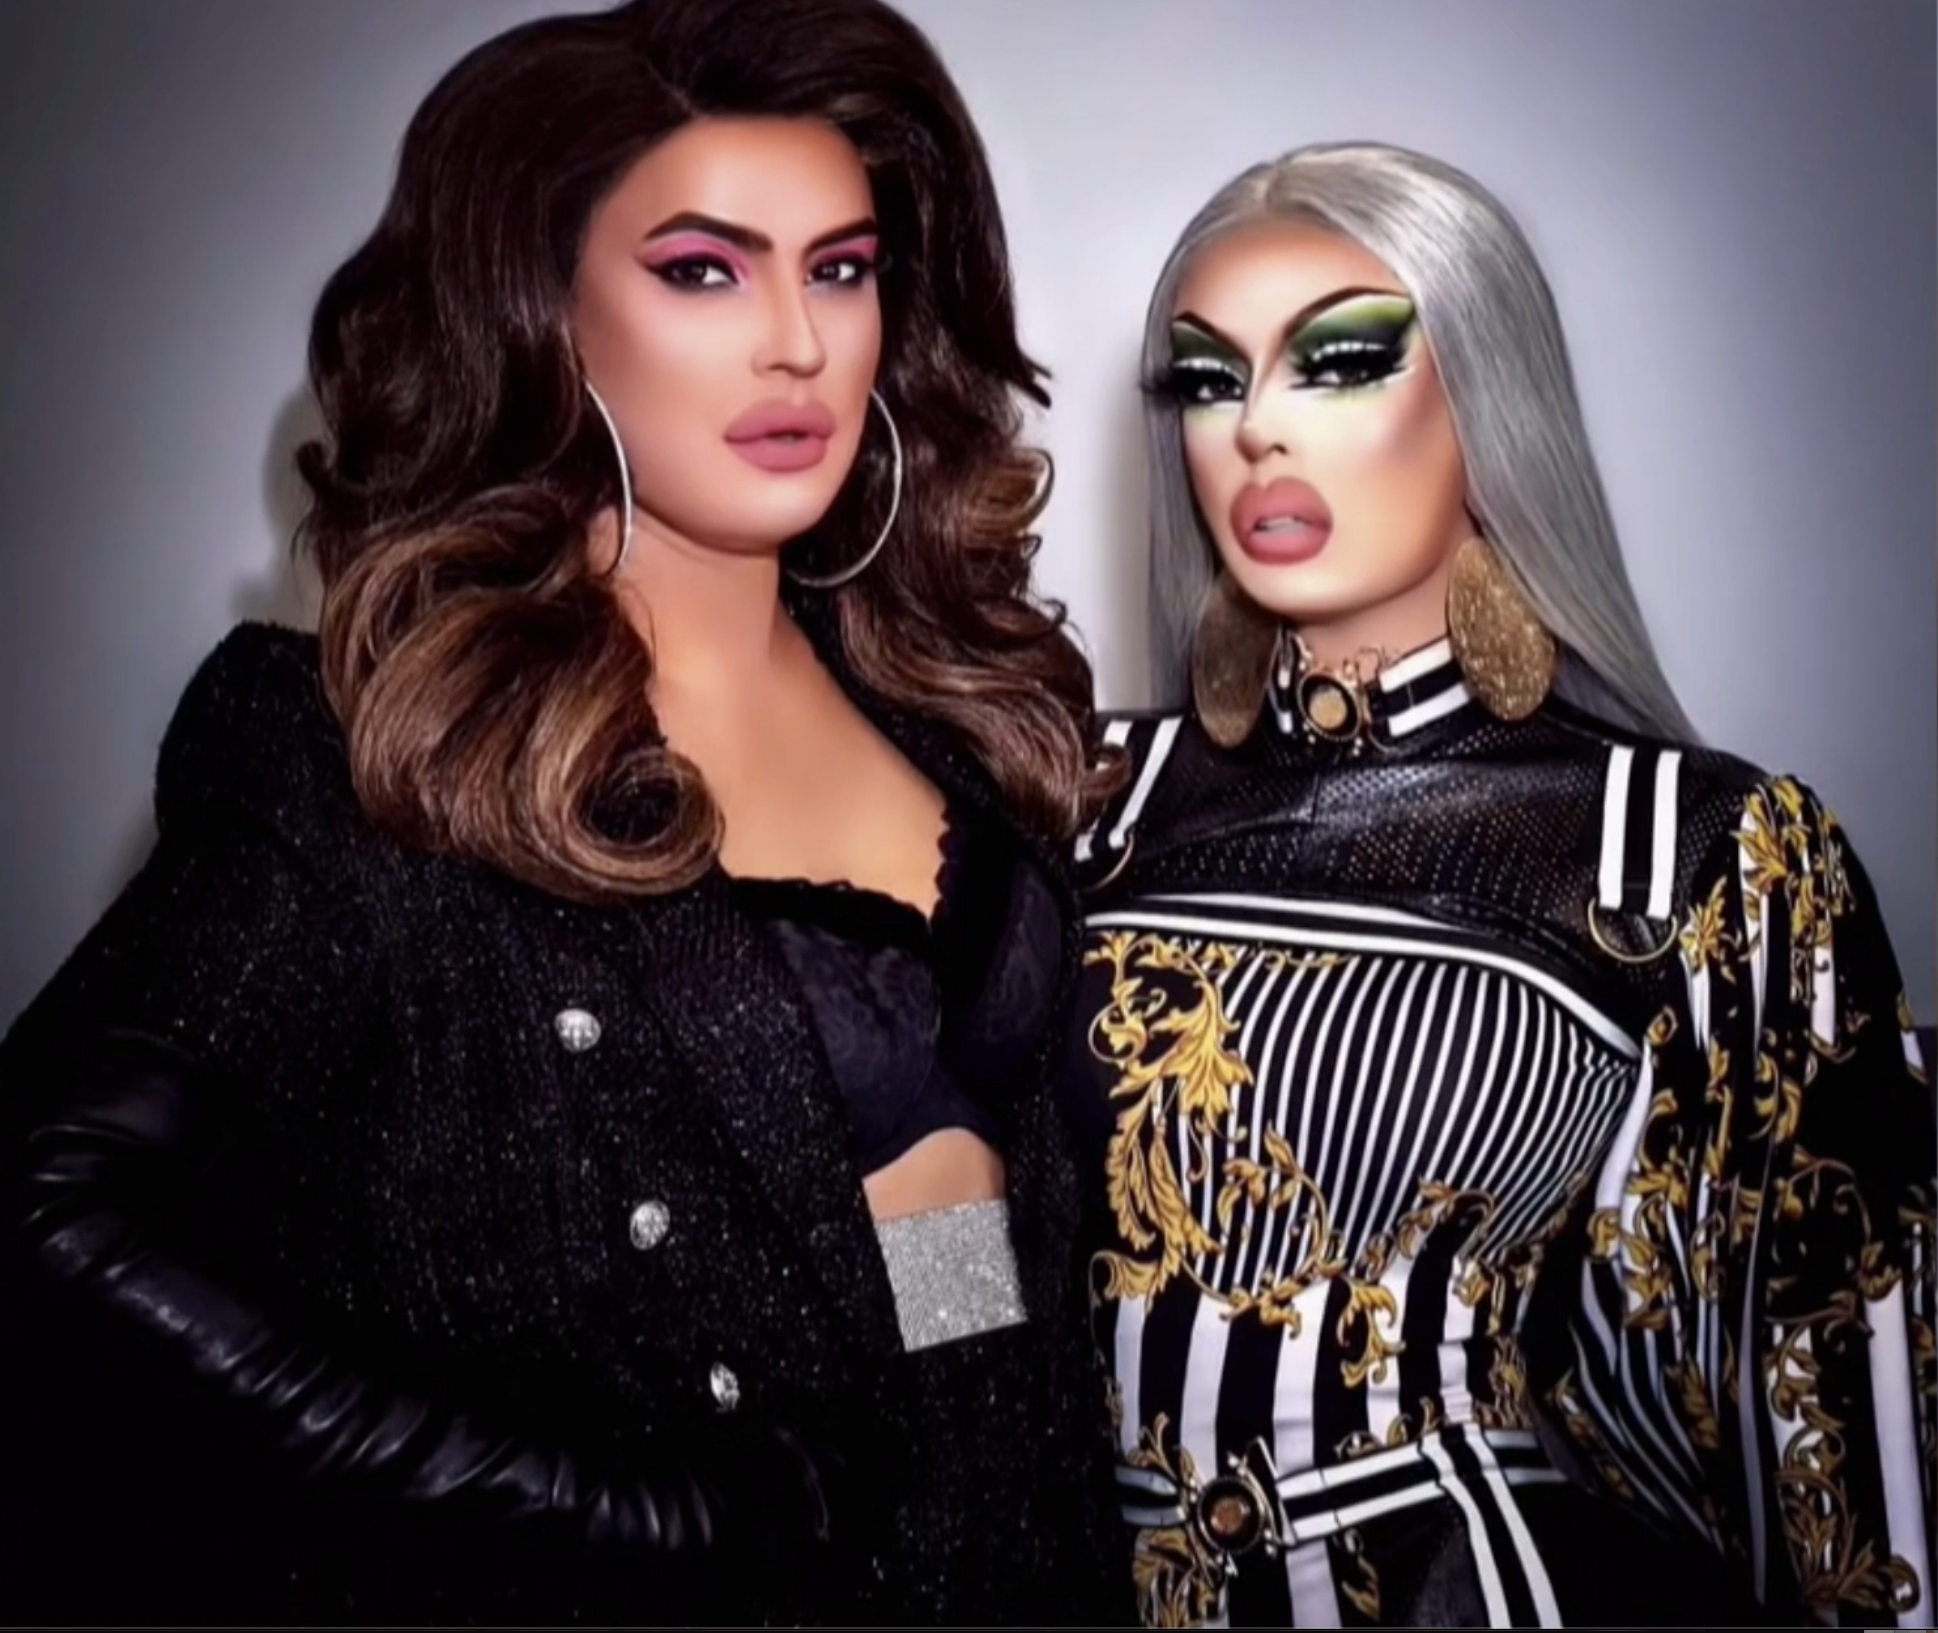 two drag queens standing next to each other